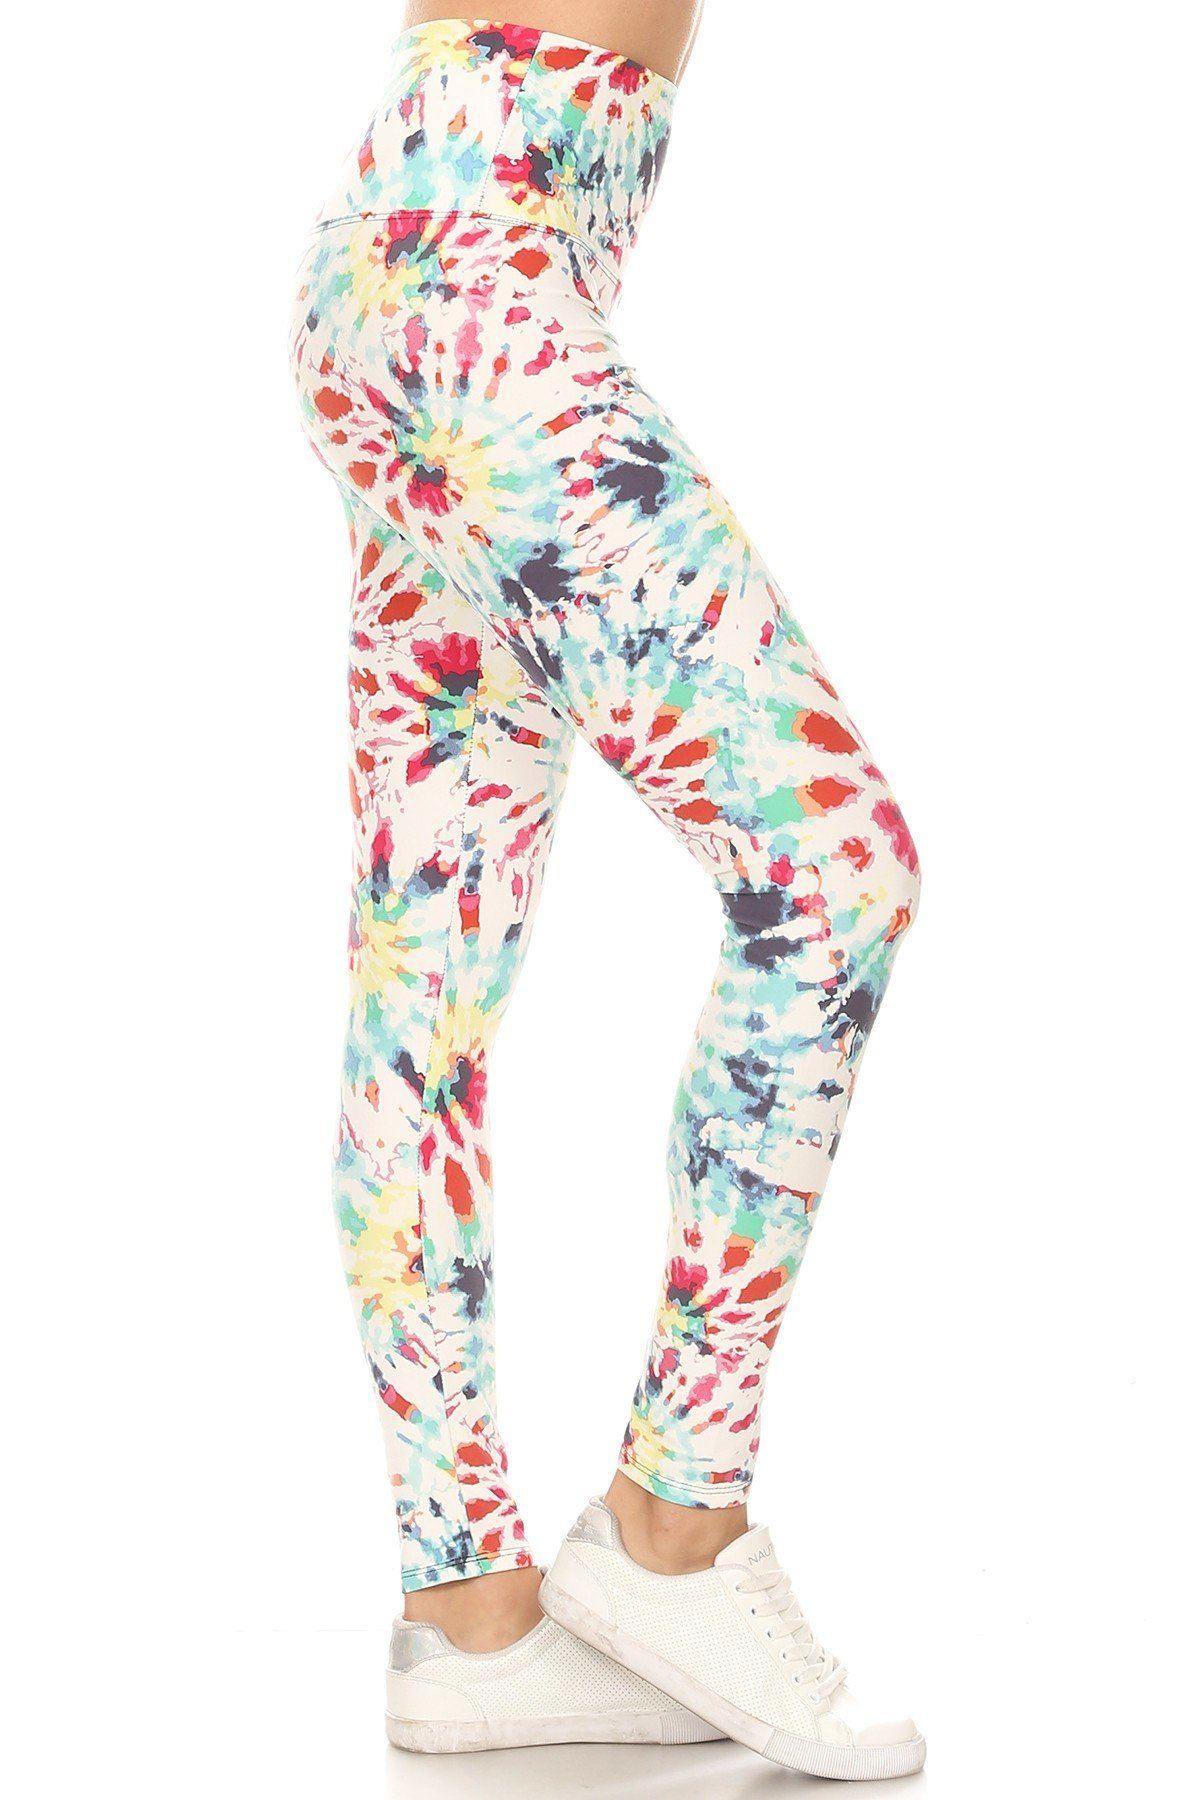 5-inch Long Yoga Style Banded Lined Camouflage Printed Knit Legging With High Waist - Pearlara